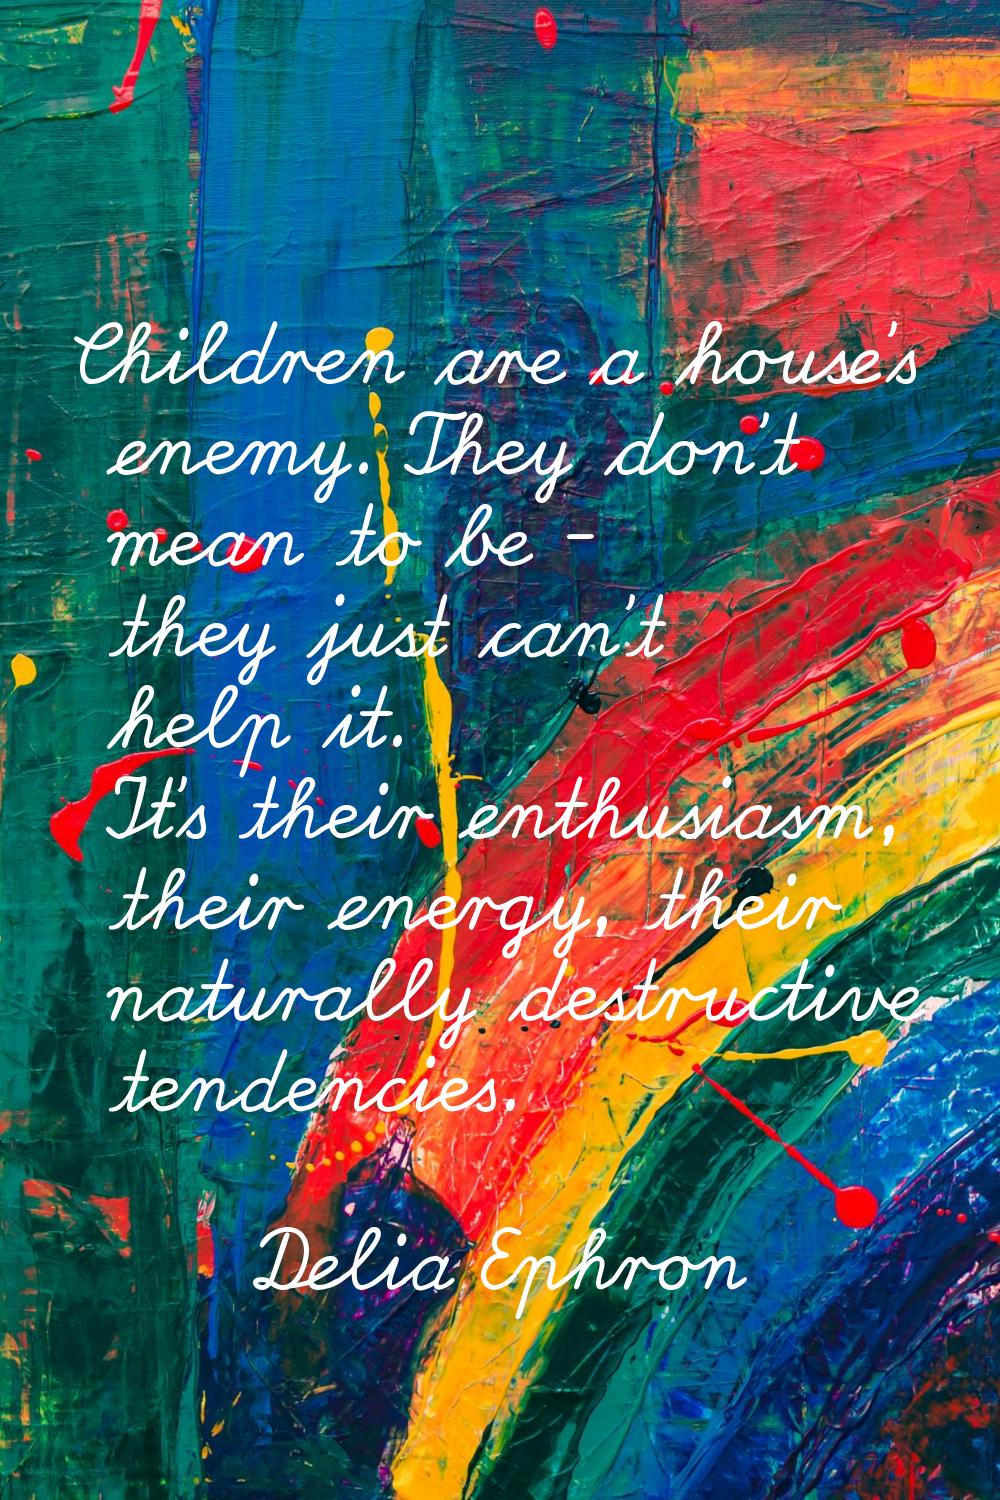 Children are a house's enemy. They don't mean to be - they just can't help it. It's their enthusias